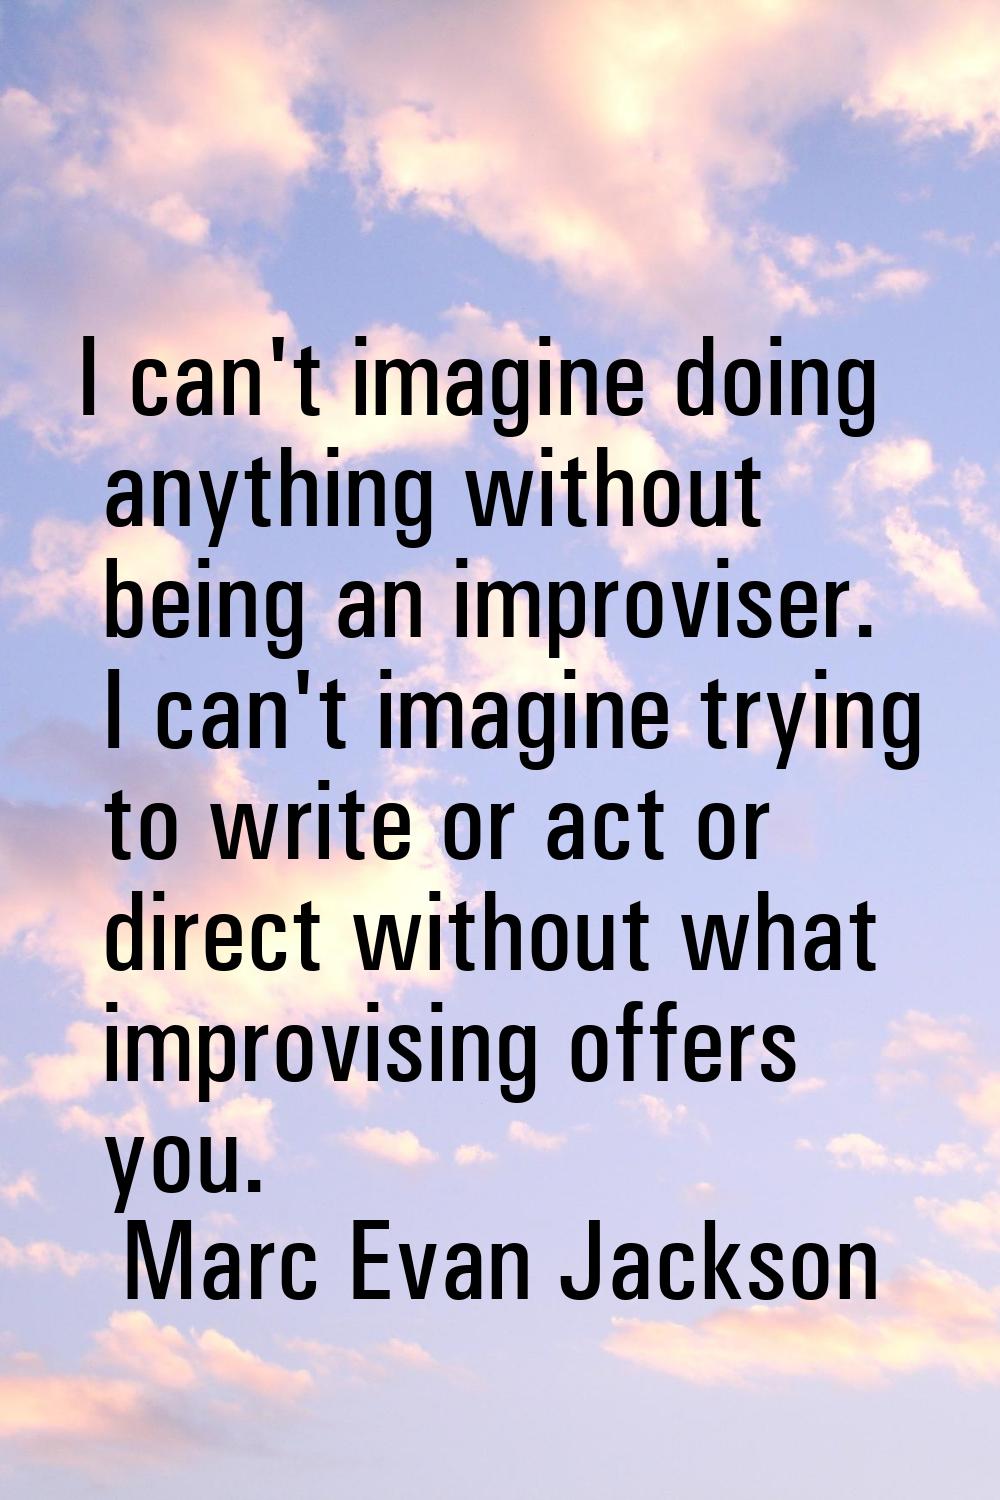 I can't imagine doing anything without being an improviser. I can't imagine trying to write or act 